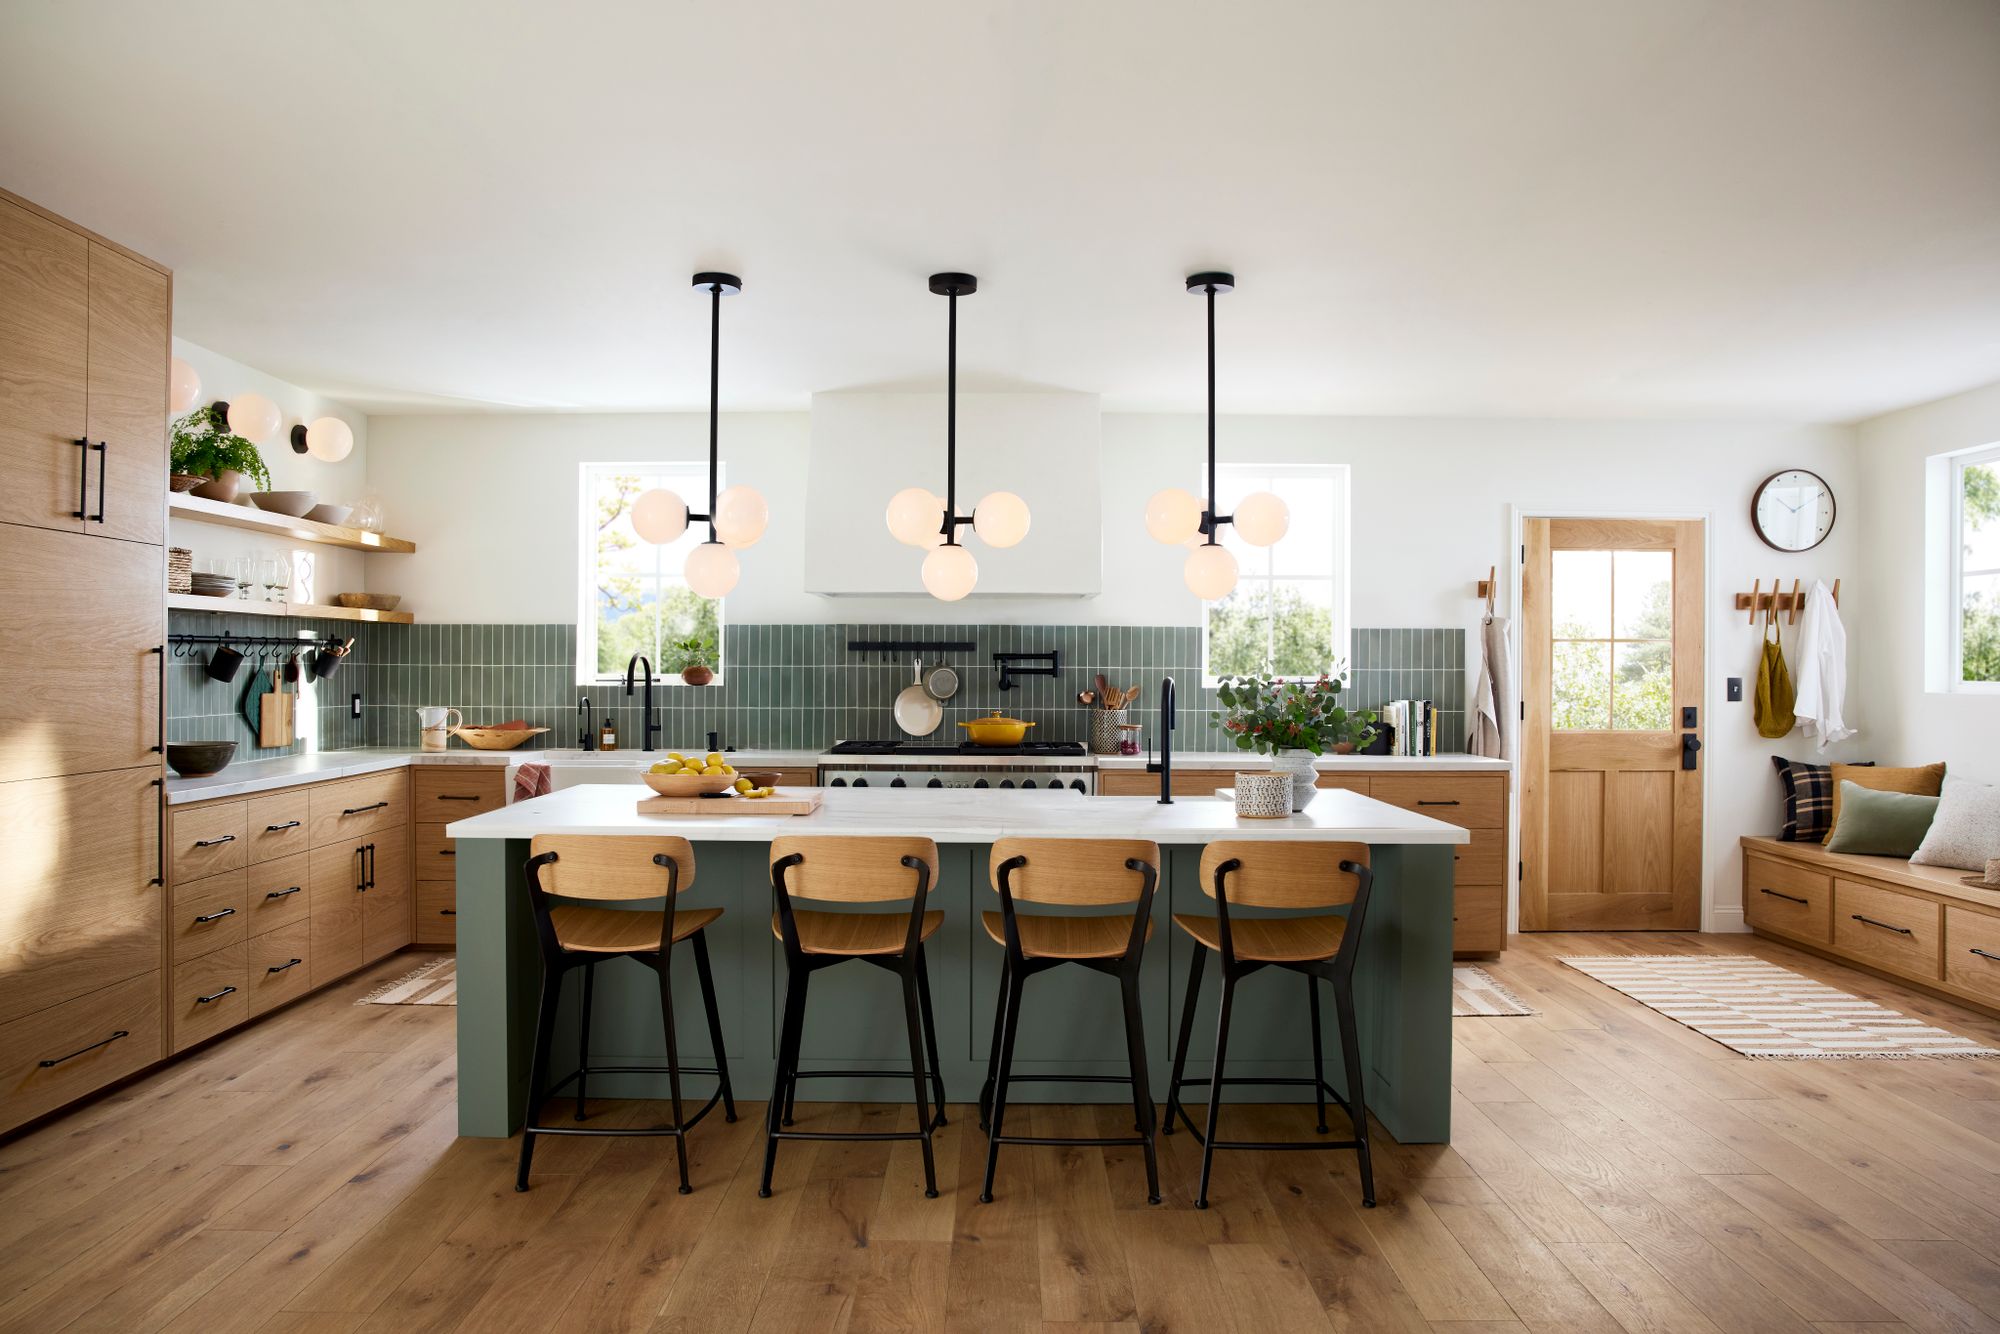  Kitchen Island with Storage and Seating,Farmhouse 3